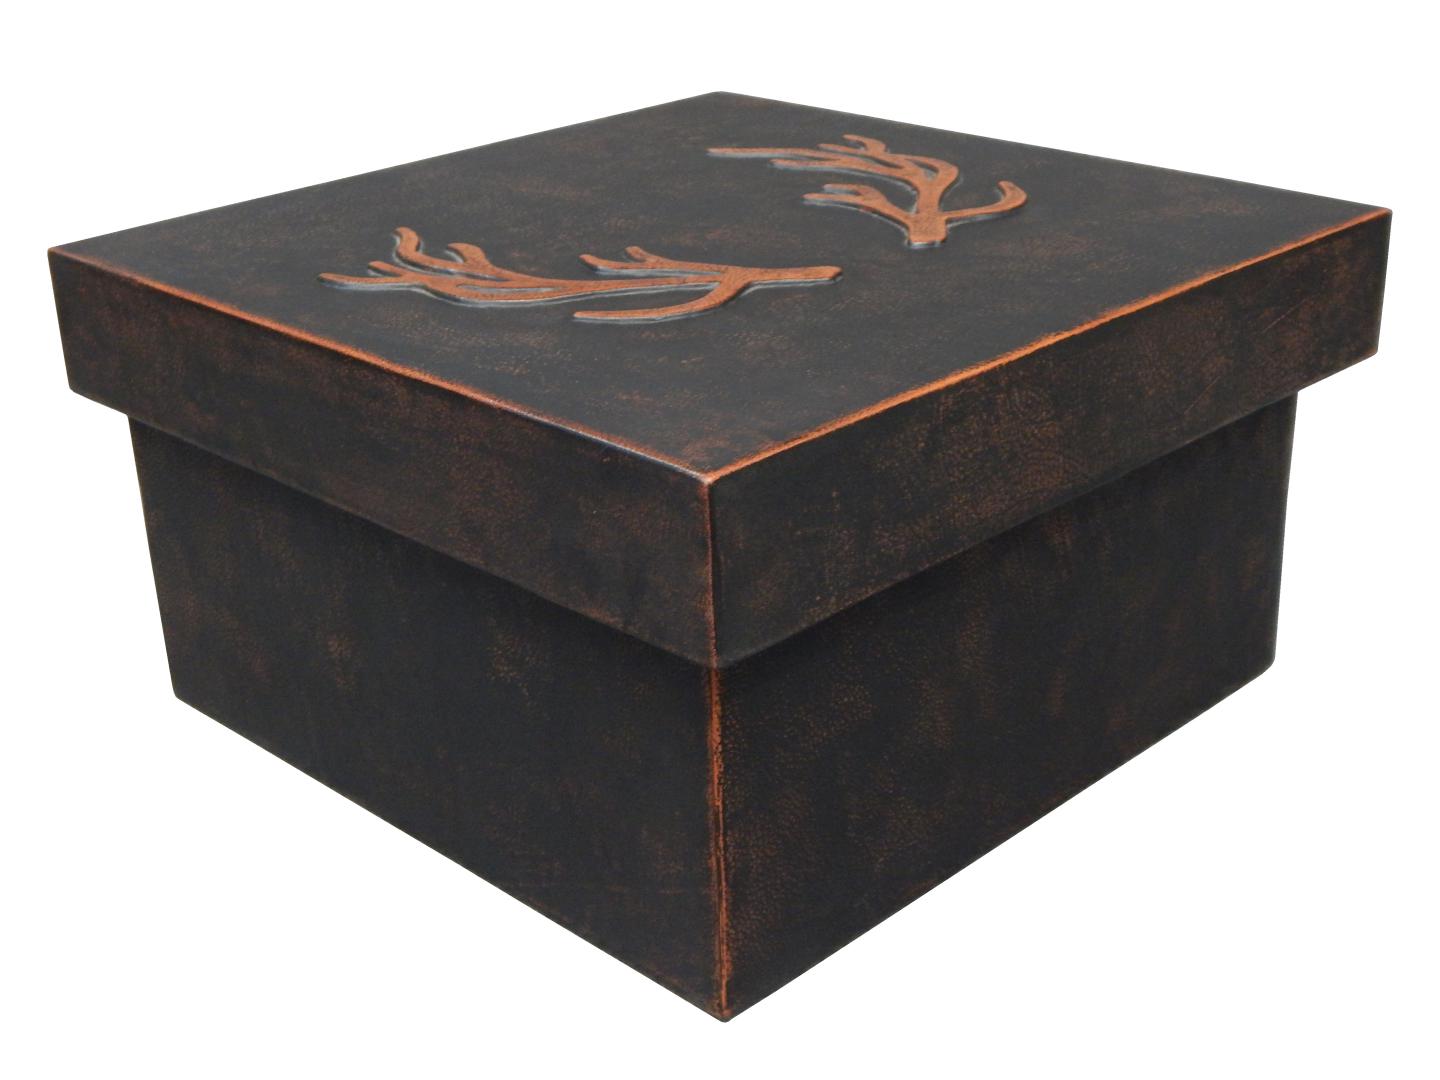 leather box with an antler deer horns design on high relief